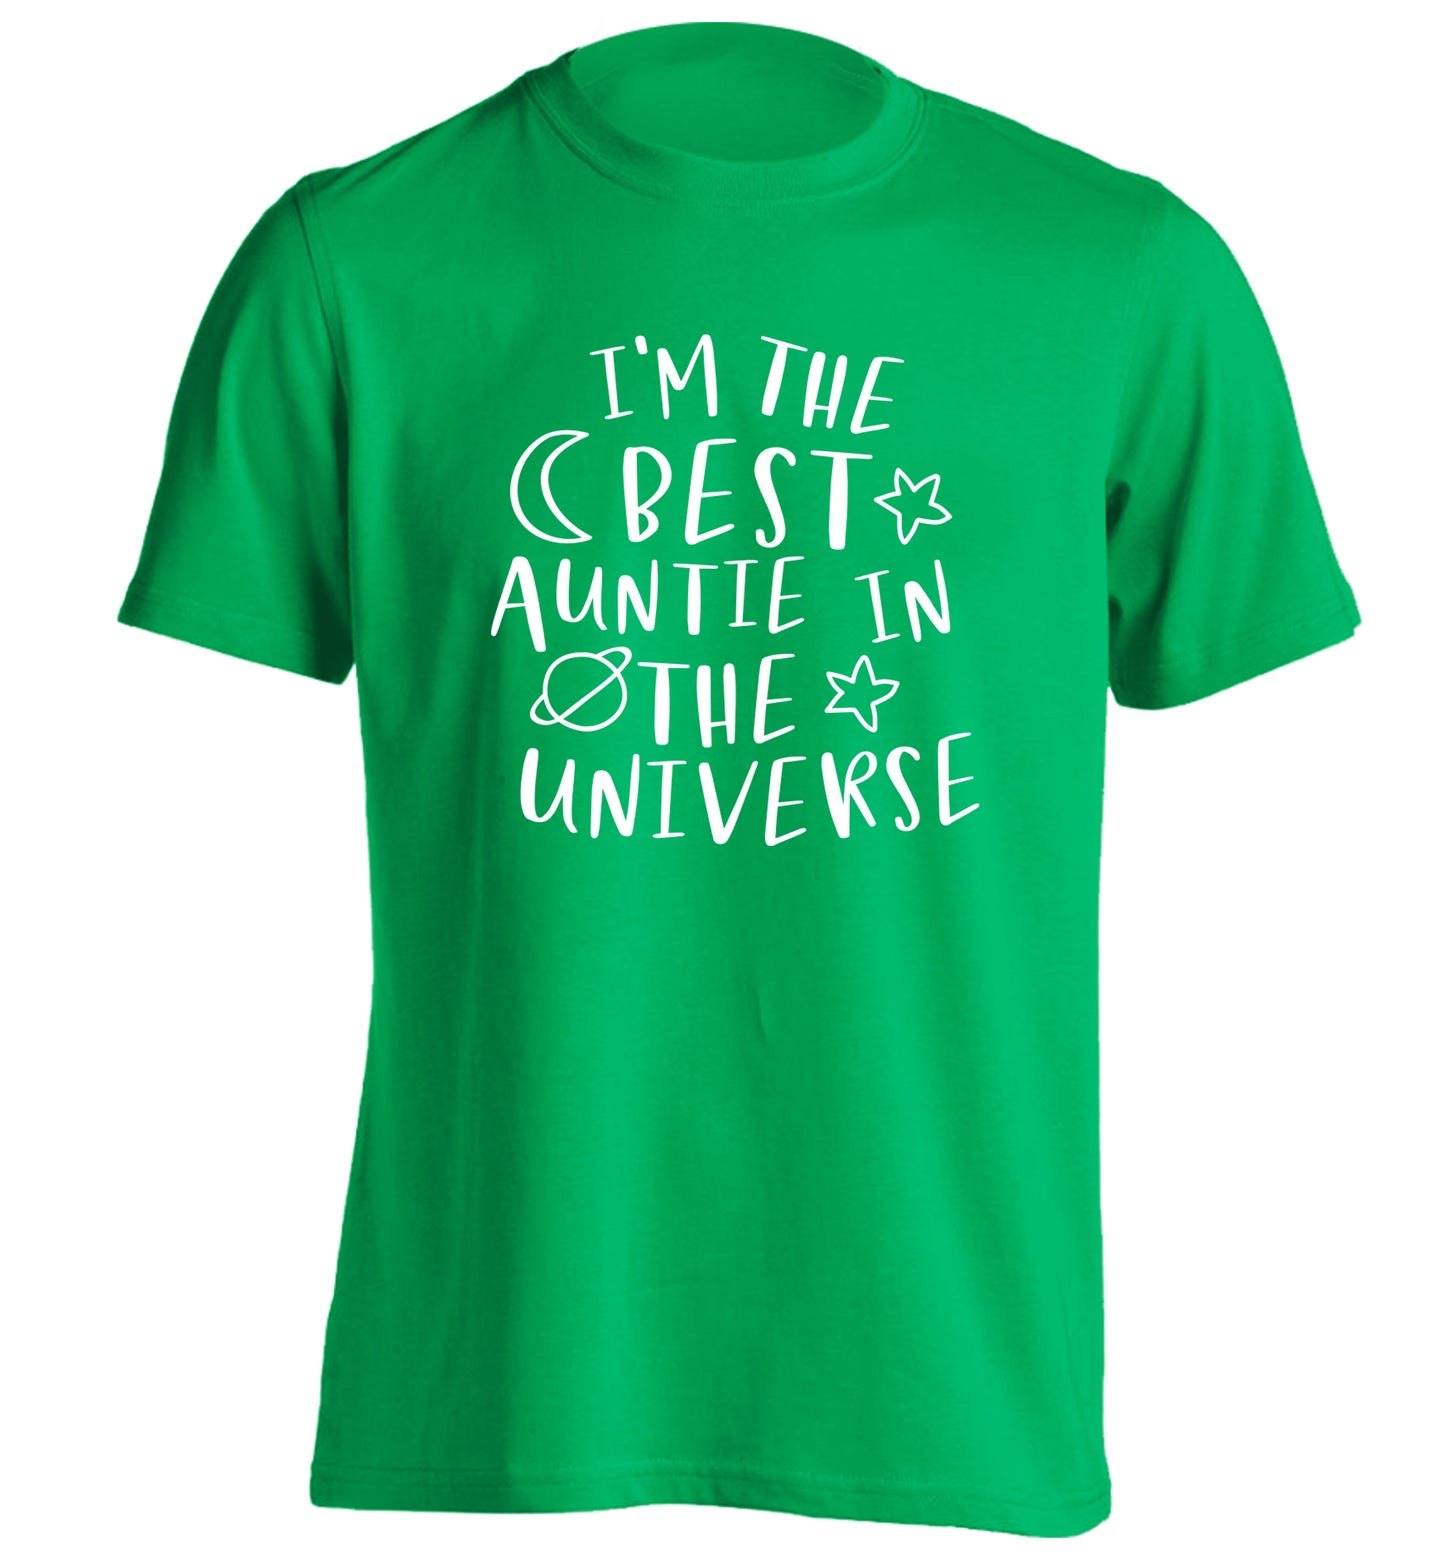 I'm the best auntie in the universe adults unisex green Tshirt 2XL